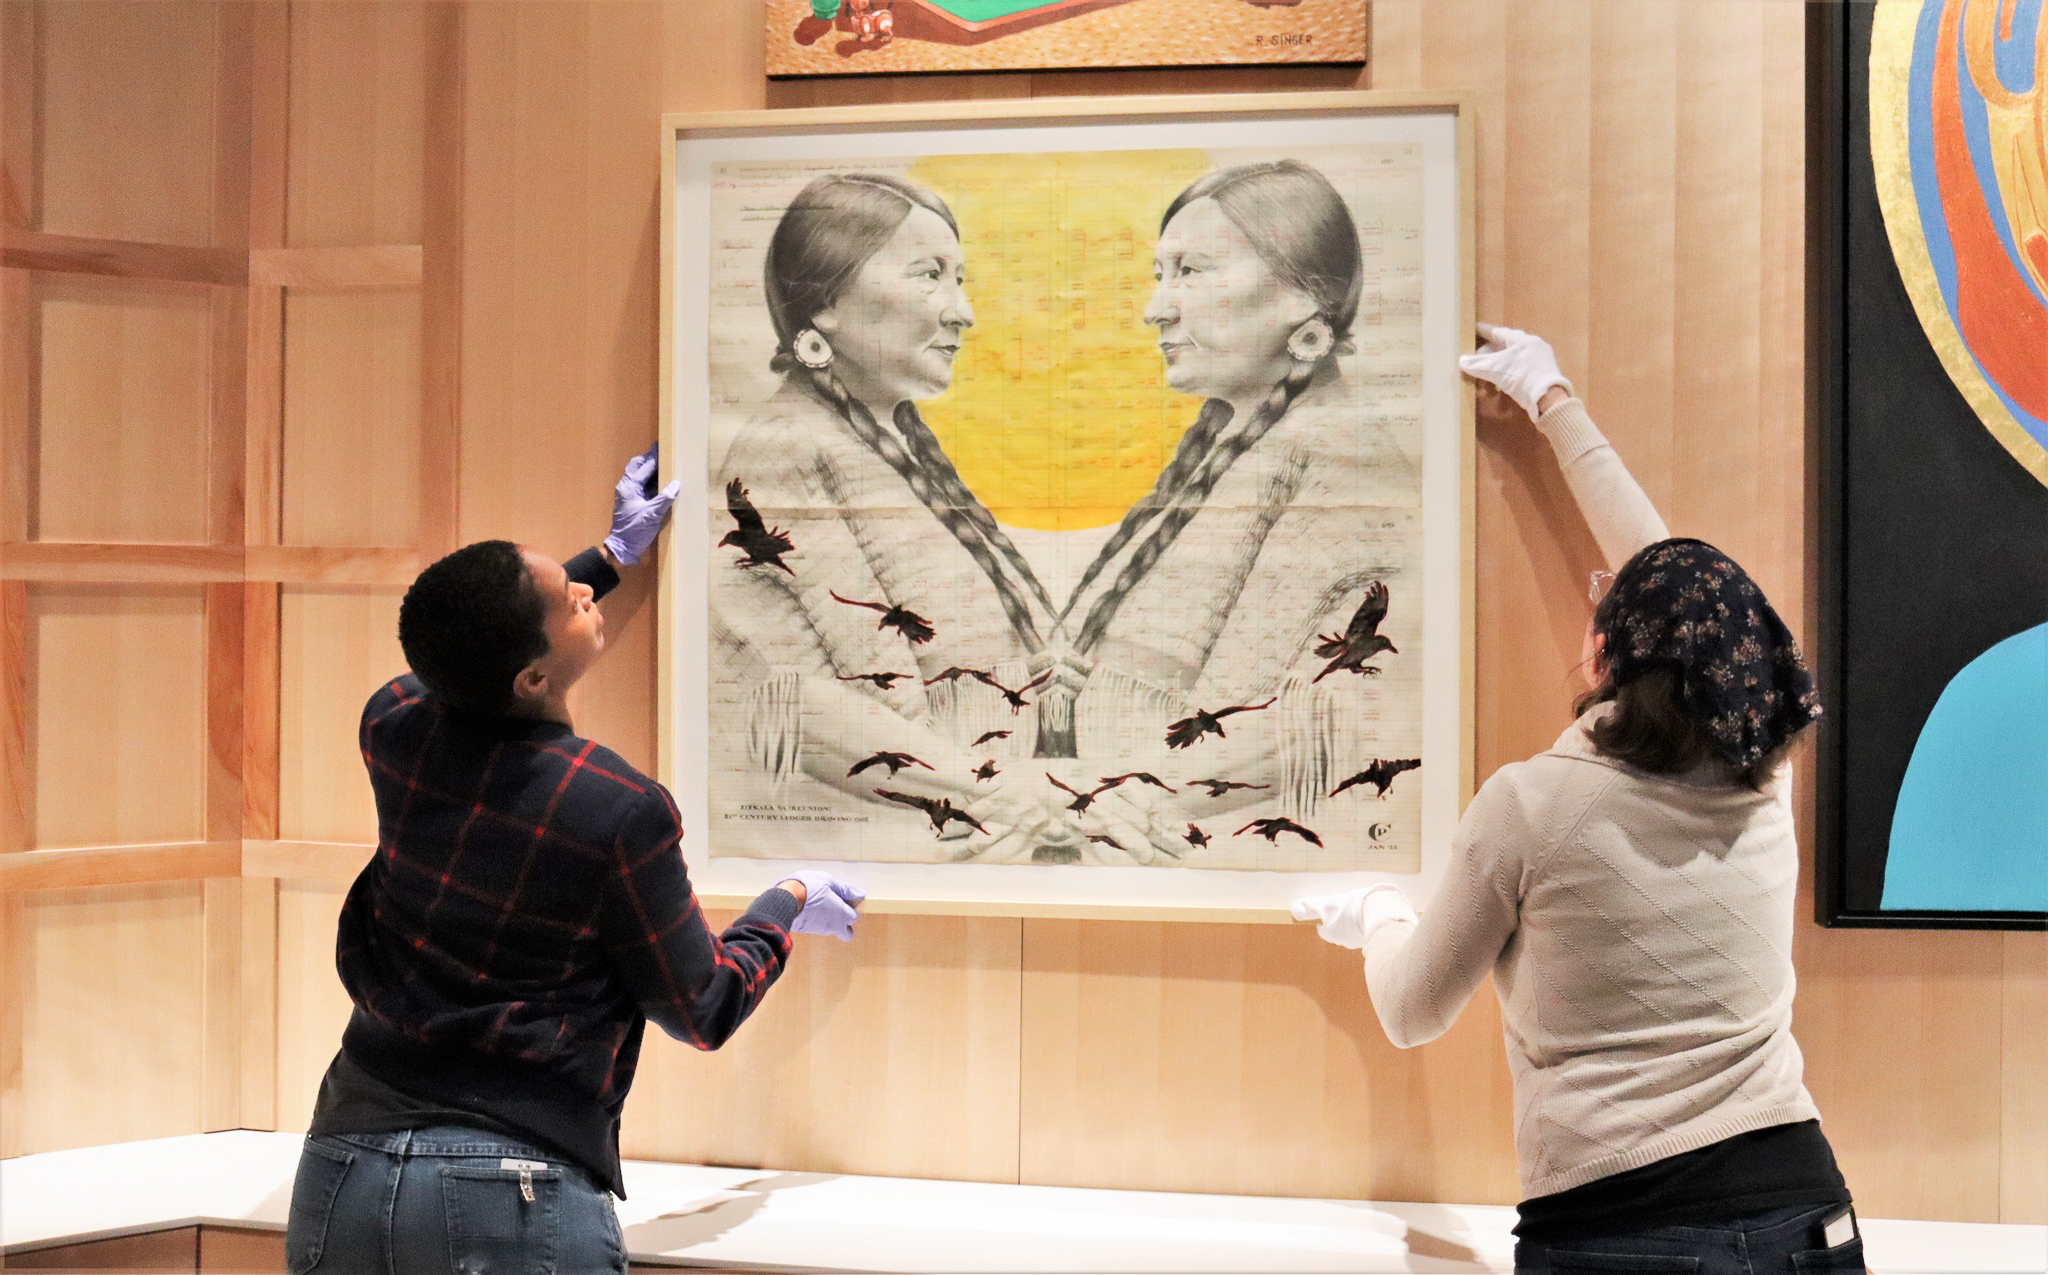 Two people hold up an artwork as they hang an exhibit in a museum gallery space. The artwork depicts two Native American people, drawn in graphite, facing each other against a bright yellow background.